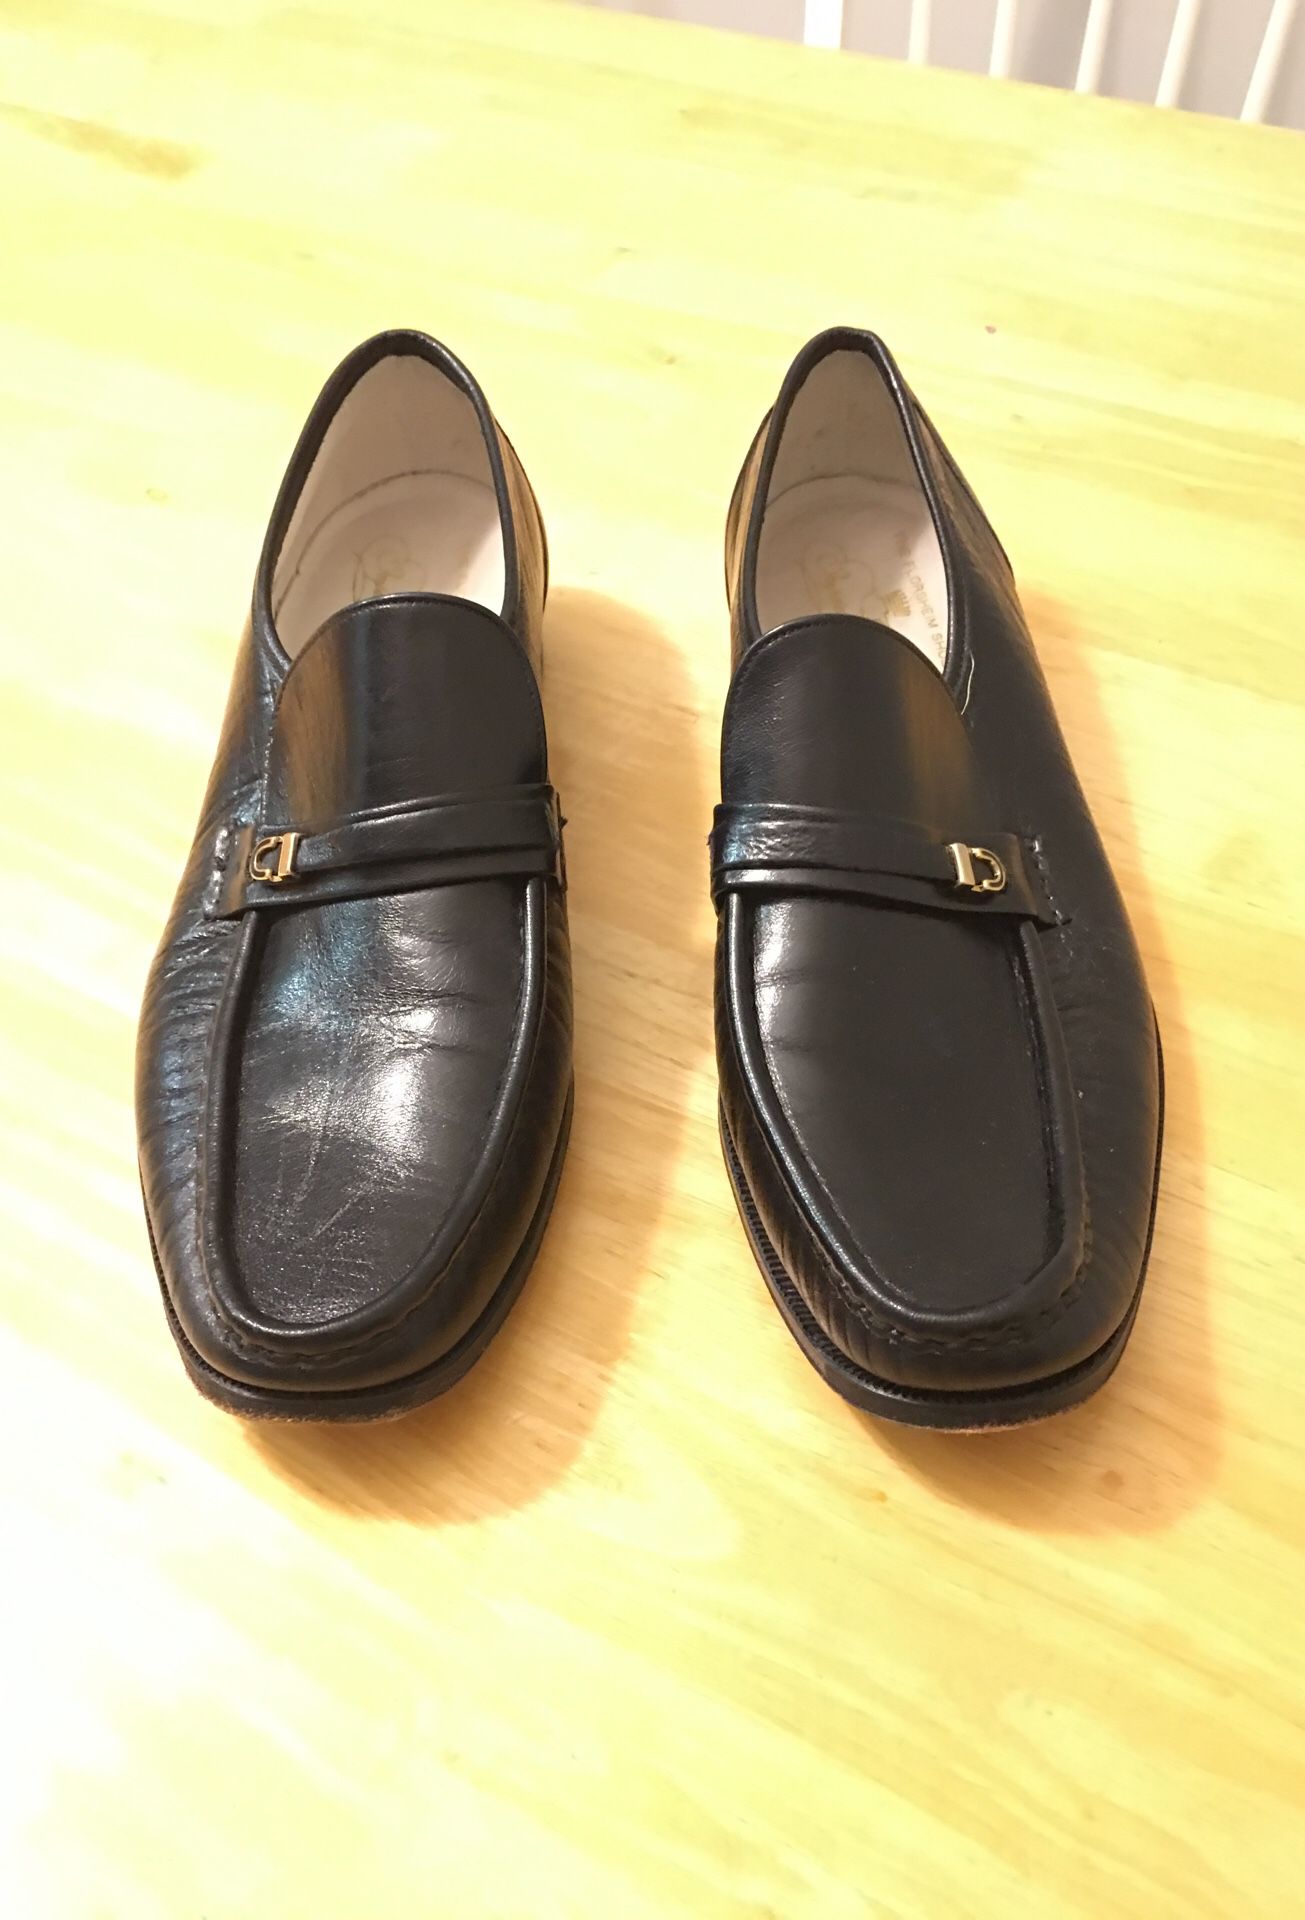 Black style dress shoes for man